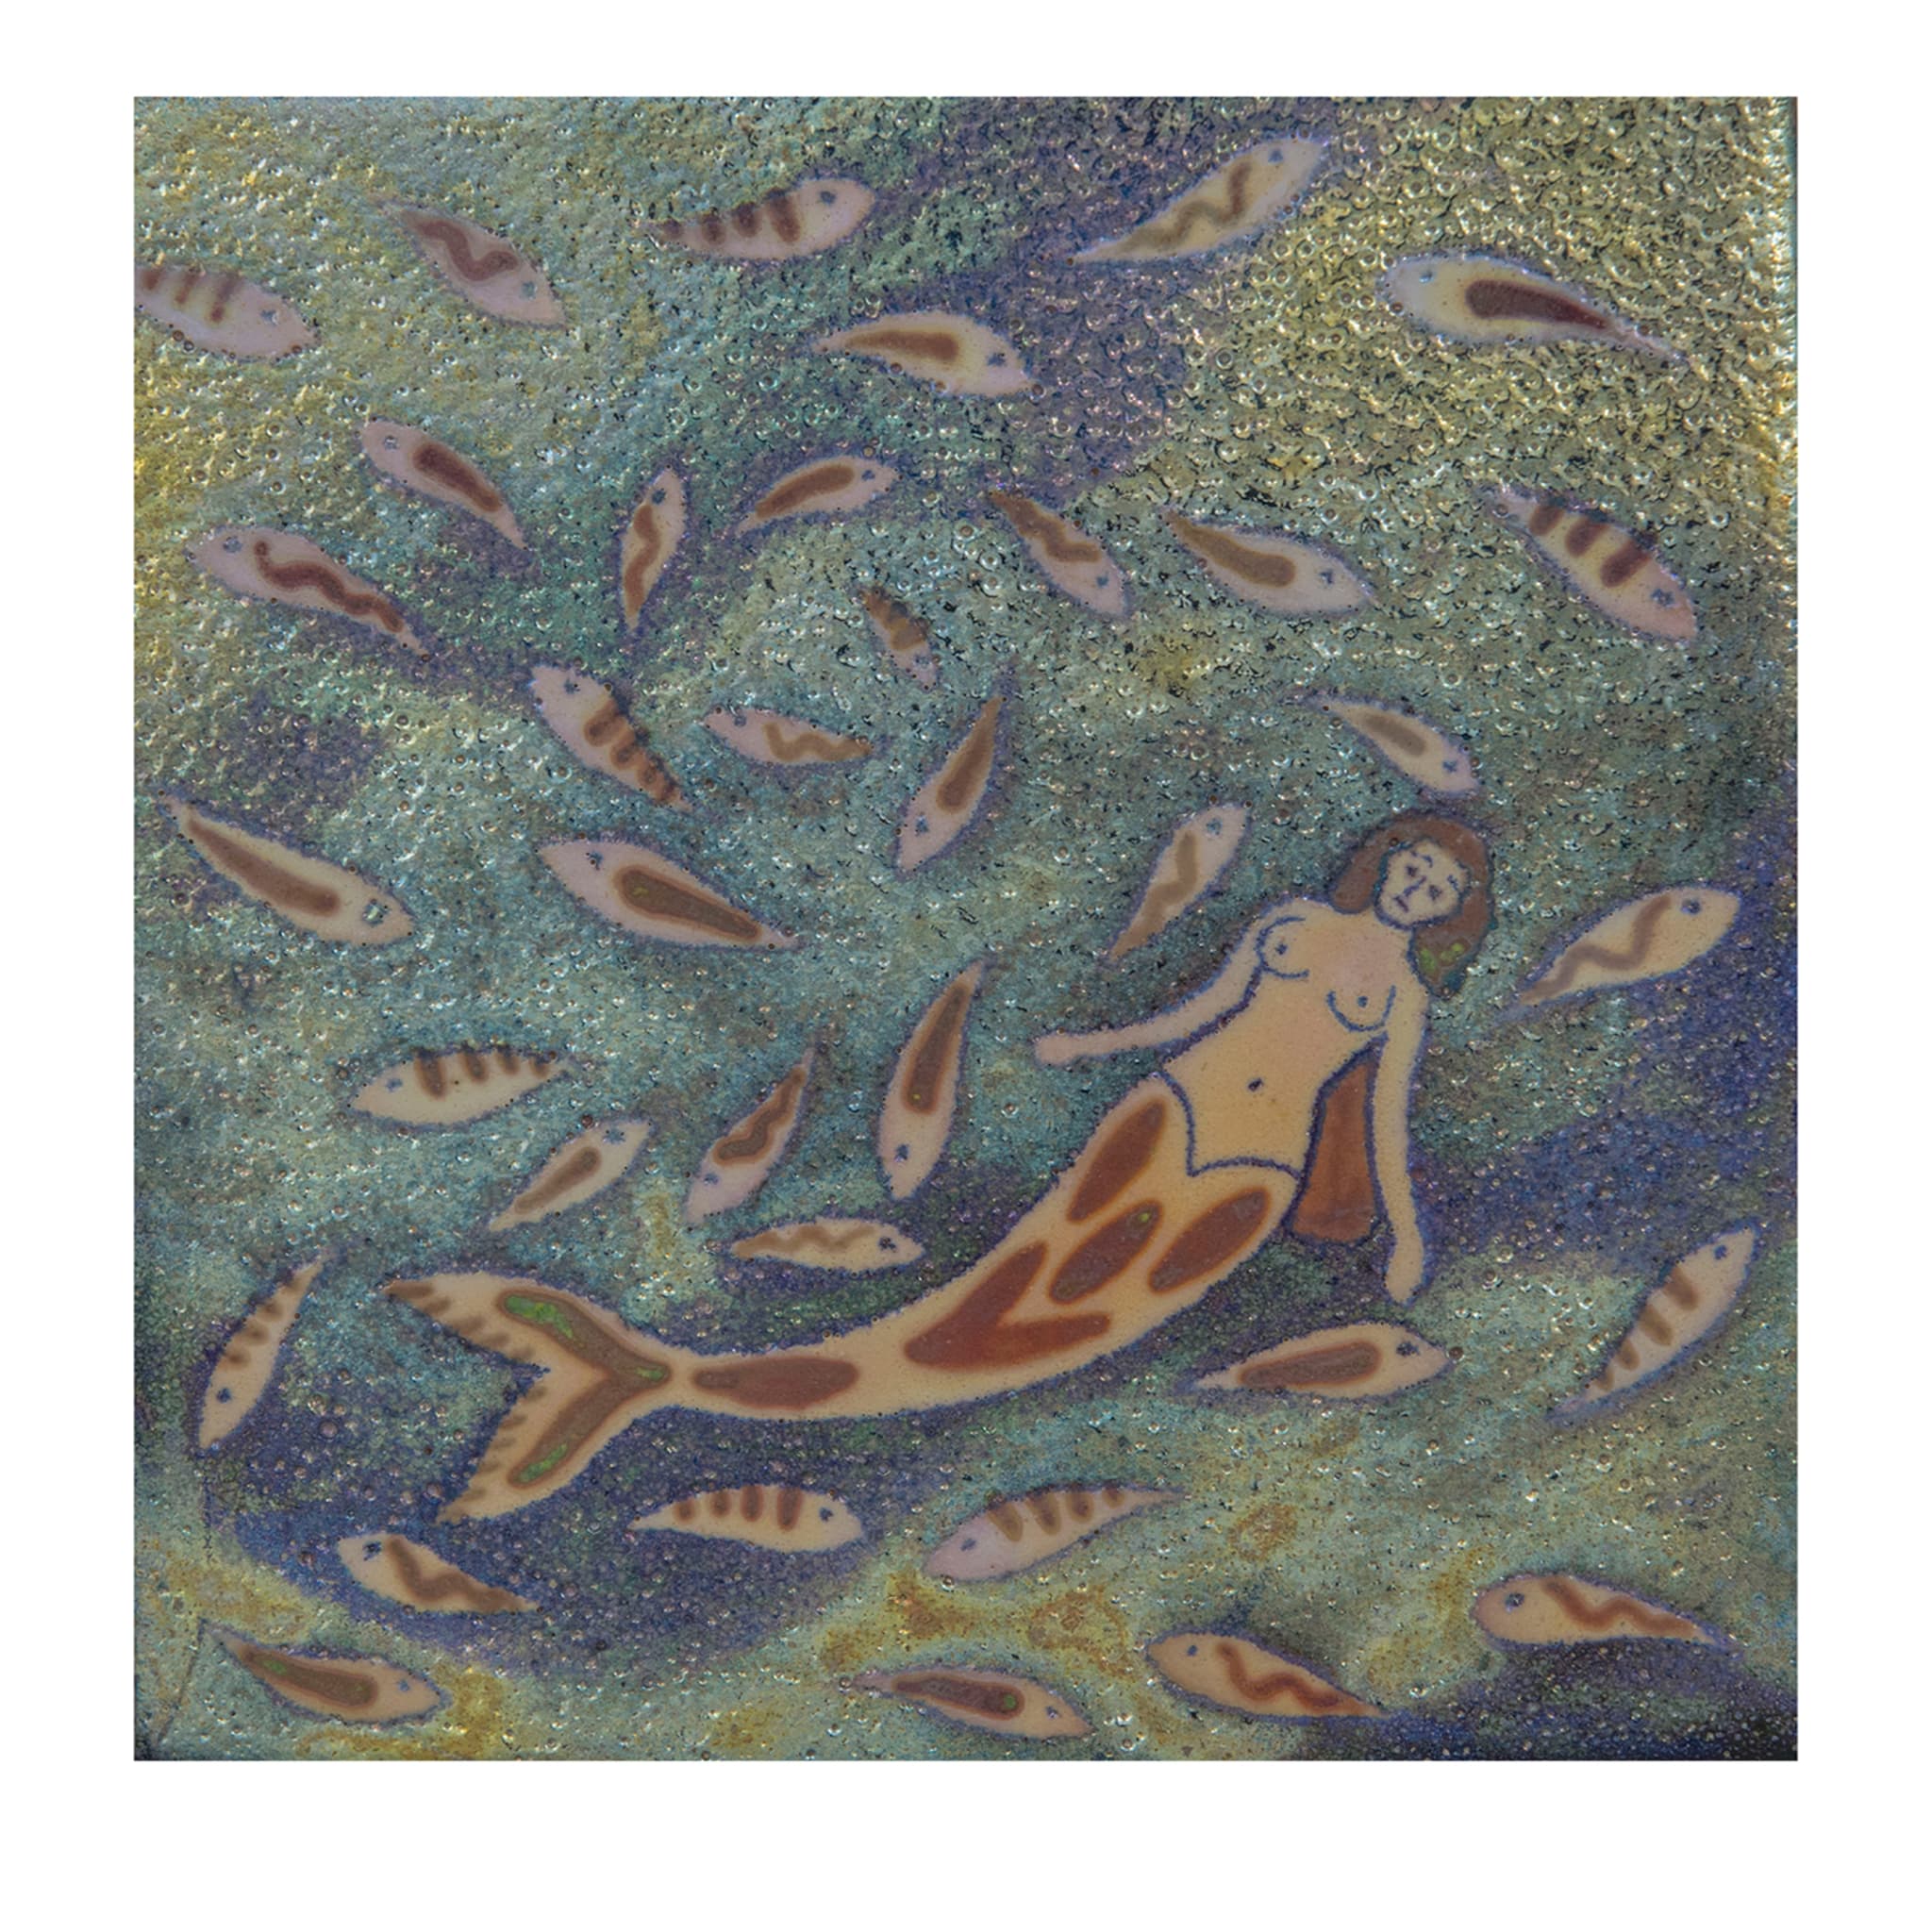 Mermaid Among Fish Silver and Copper Lustre Tile #1 - Main view